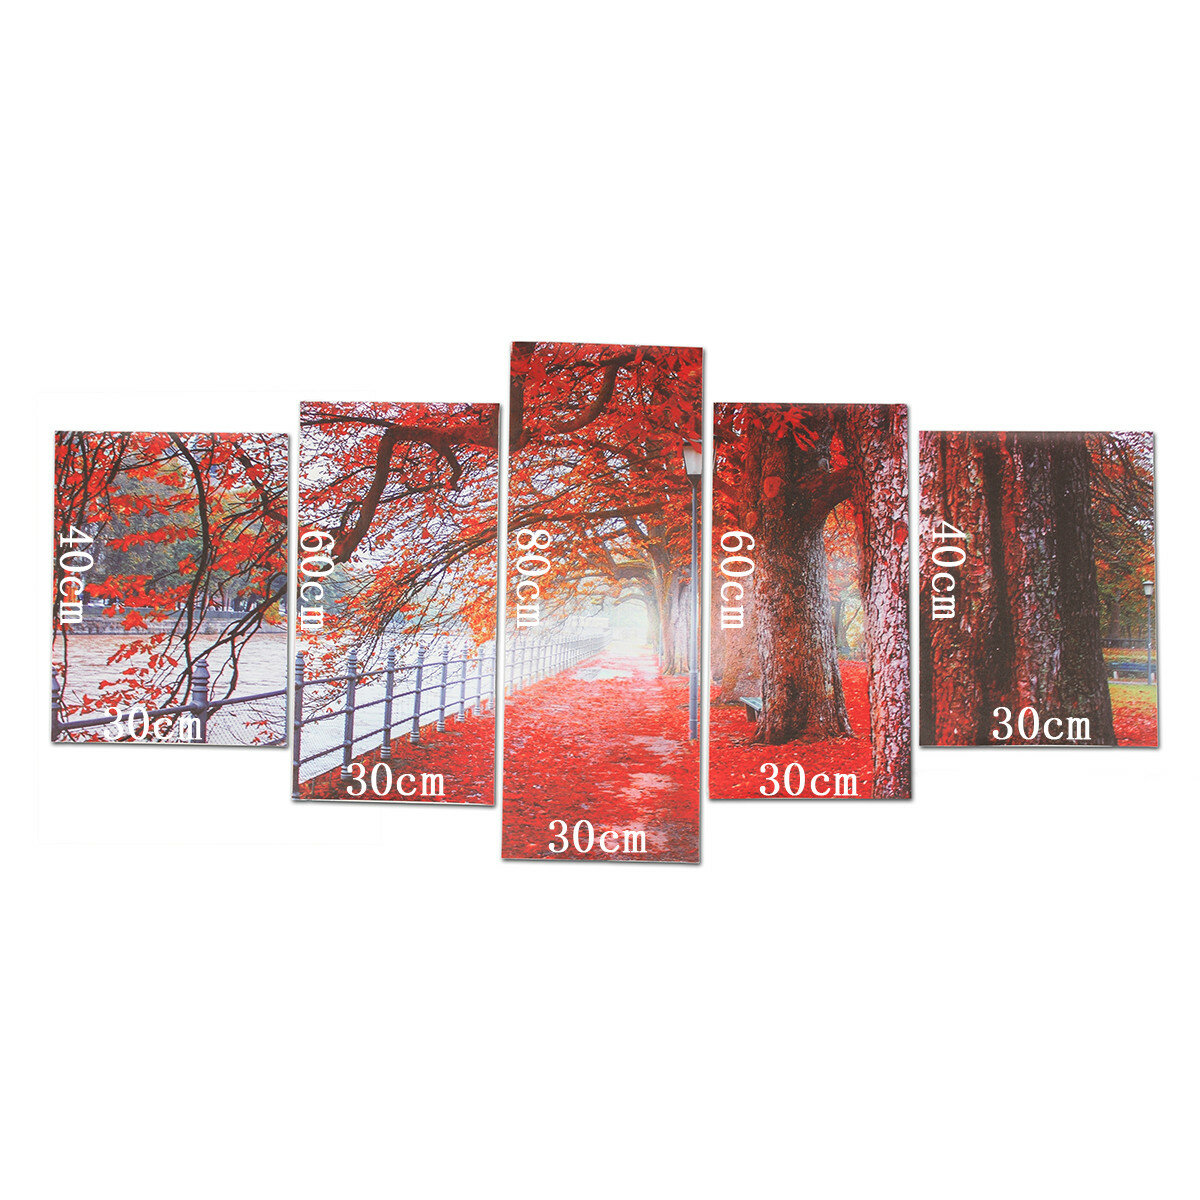 5Pcs Red Falling Leaves Canvas Painting Autumn Tree Wall Decorative Print Art Pictures Unframed Wall